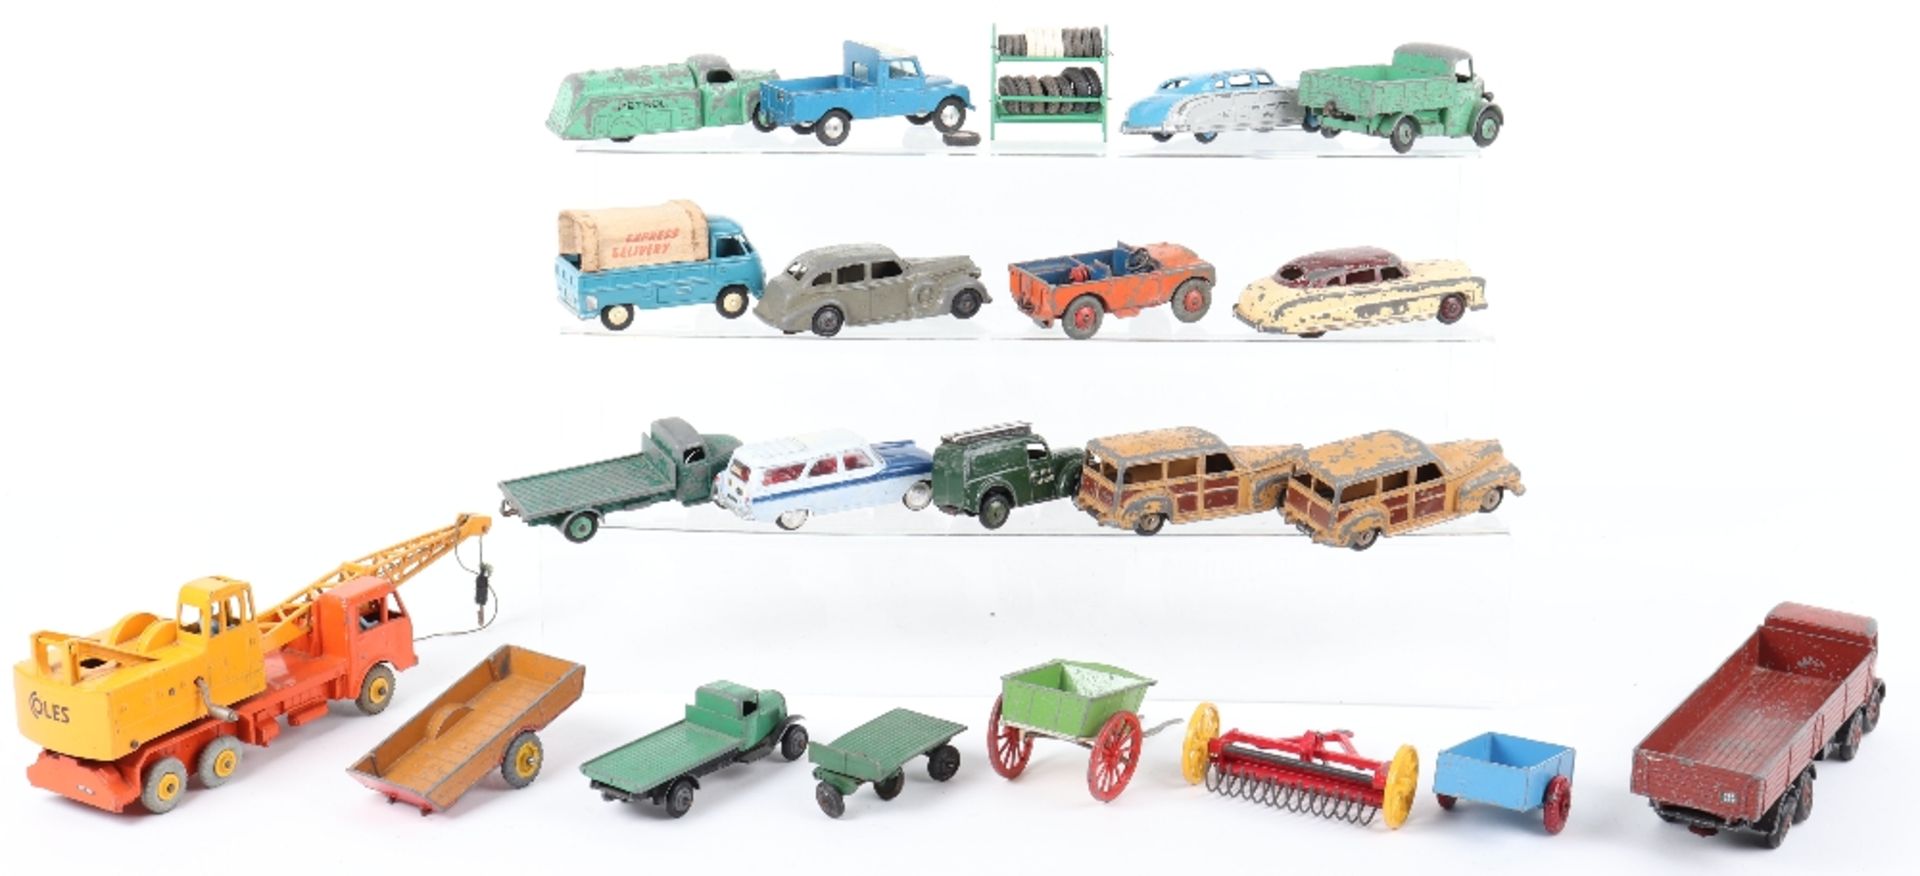 A Mixed Quantity Of Playworn Diecast Toy Models - Image 2 of 2